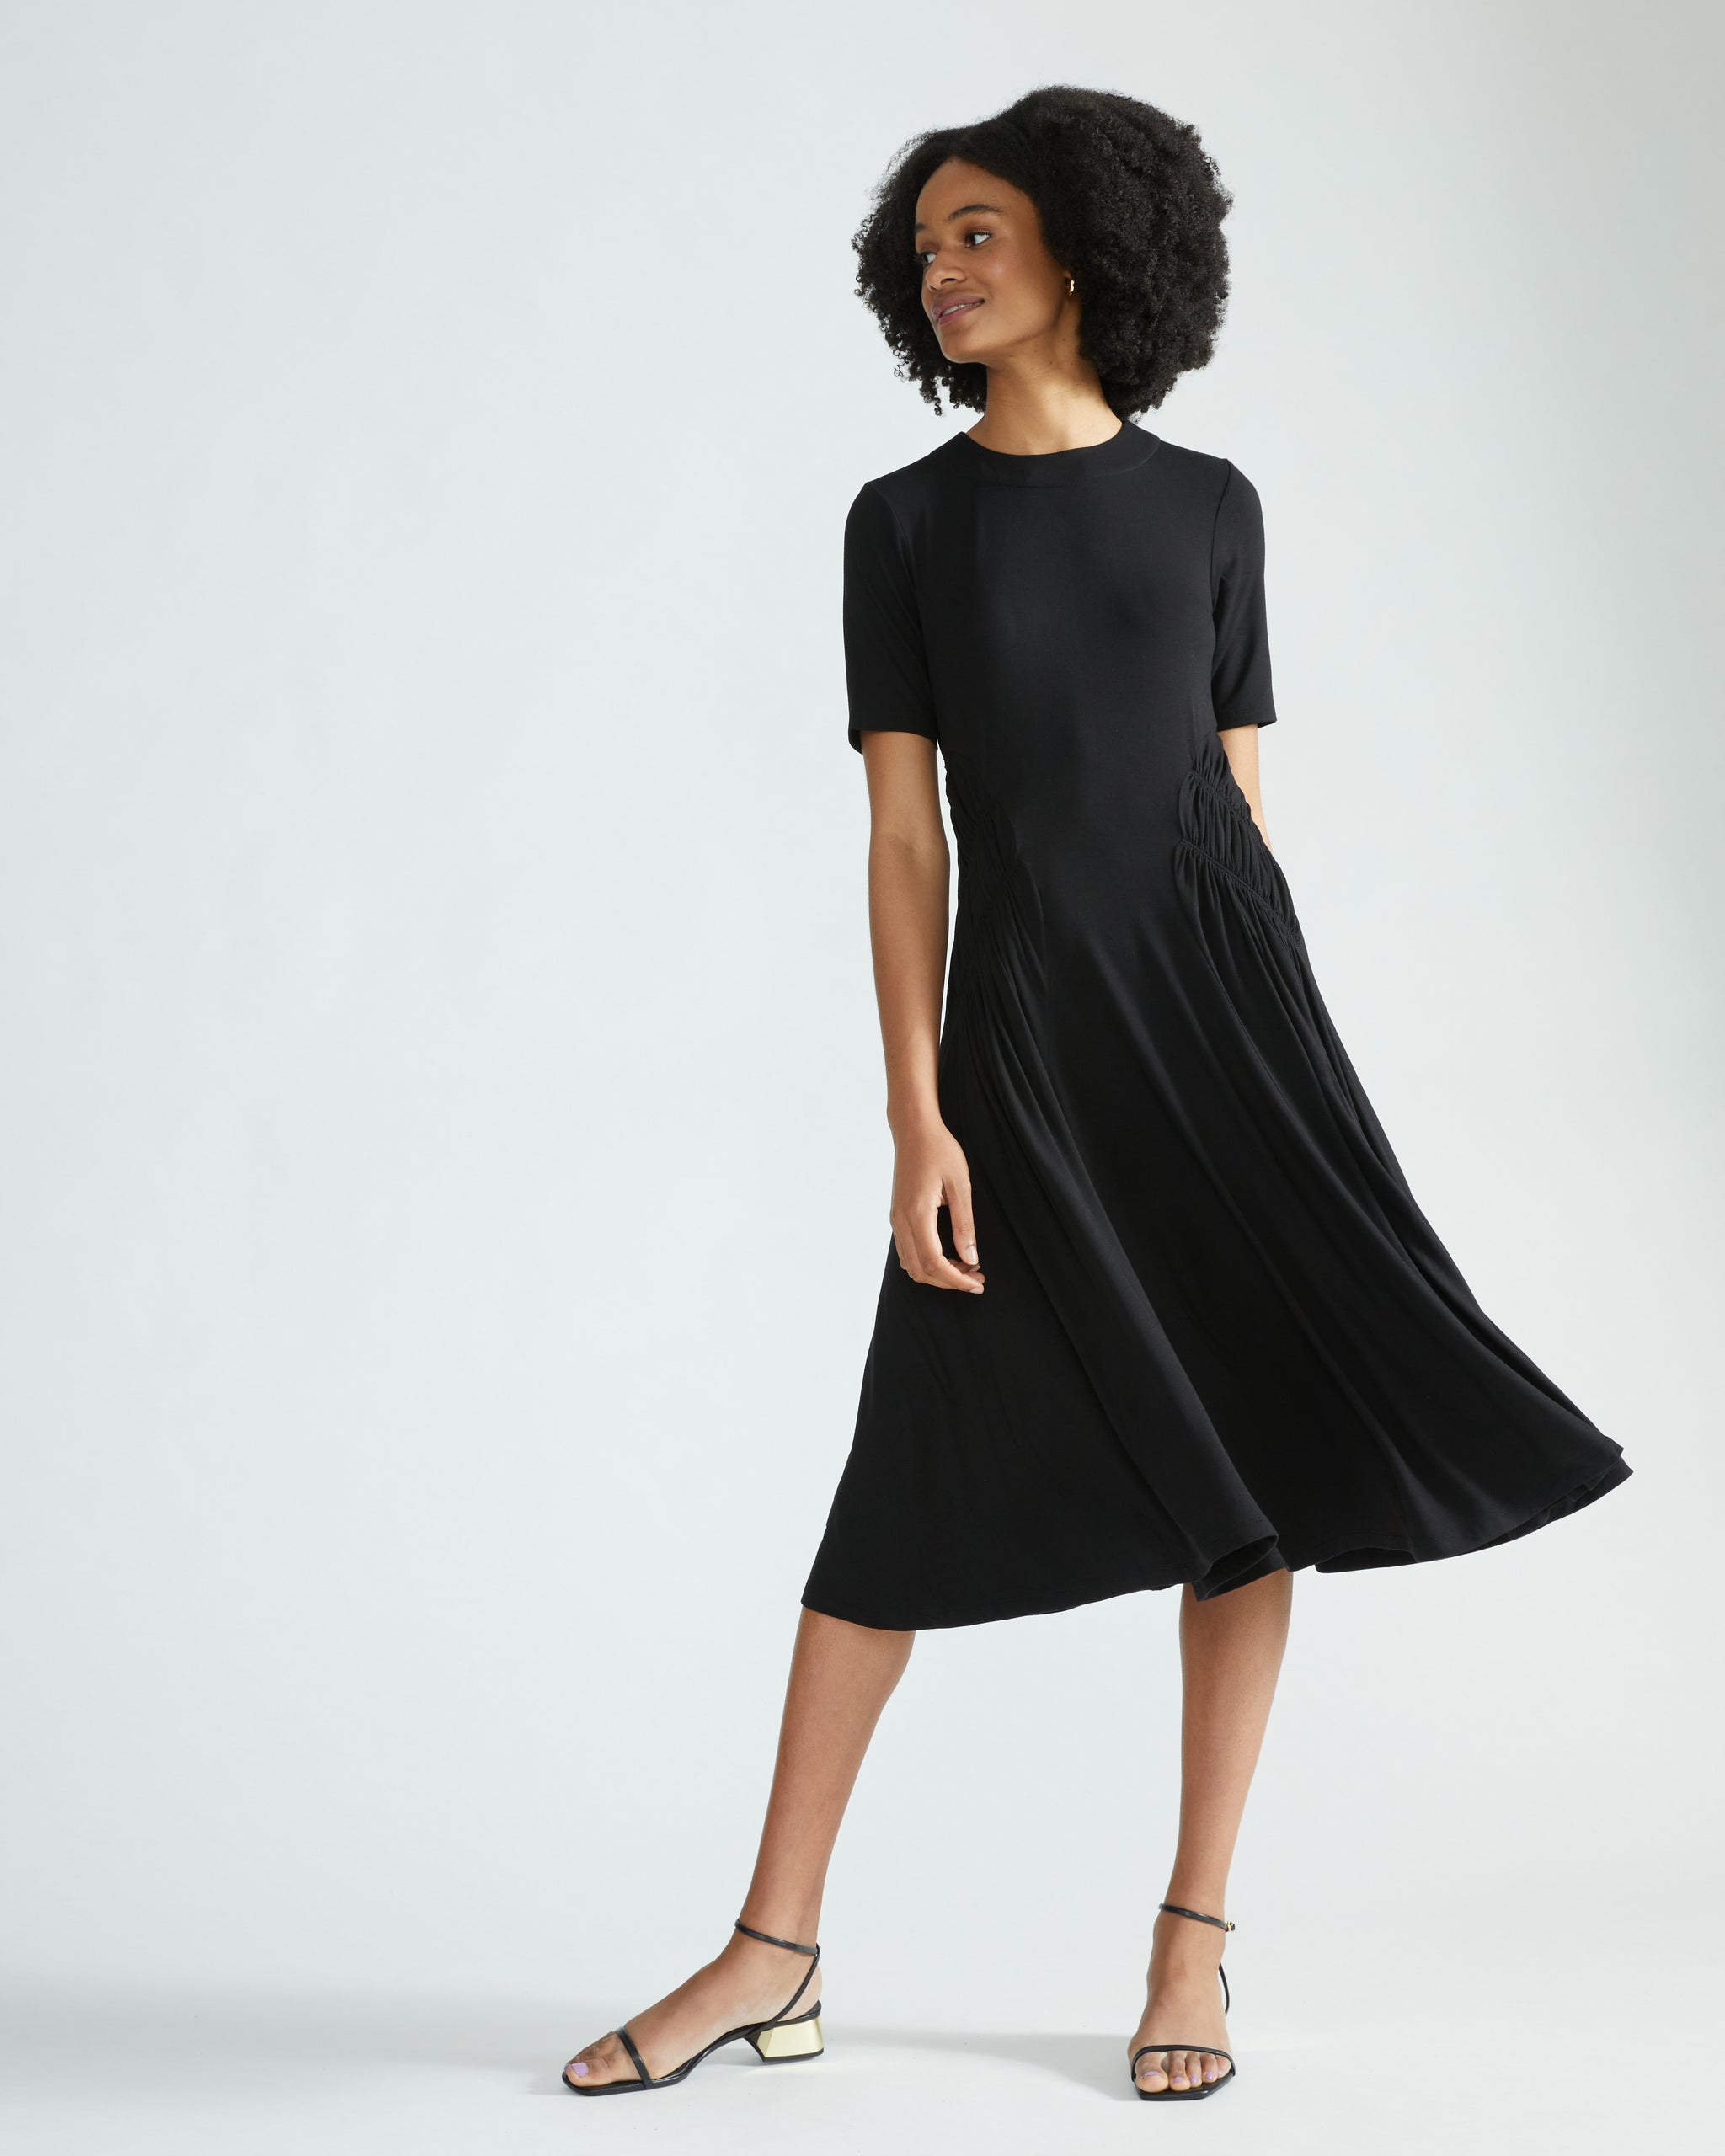 I tried on black Skims dress and it's a 10 - I absolutely love it and the  sizing is perfect